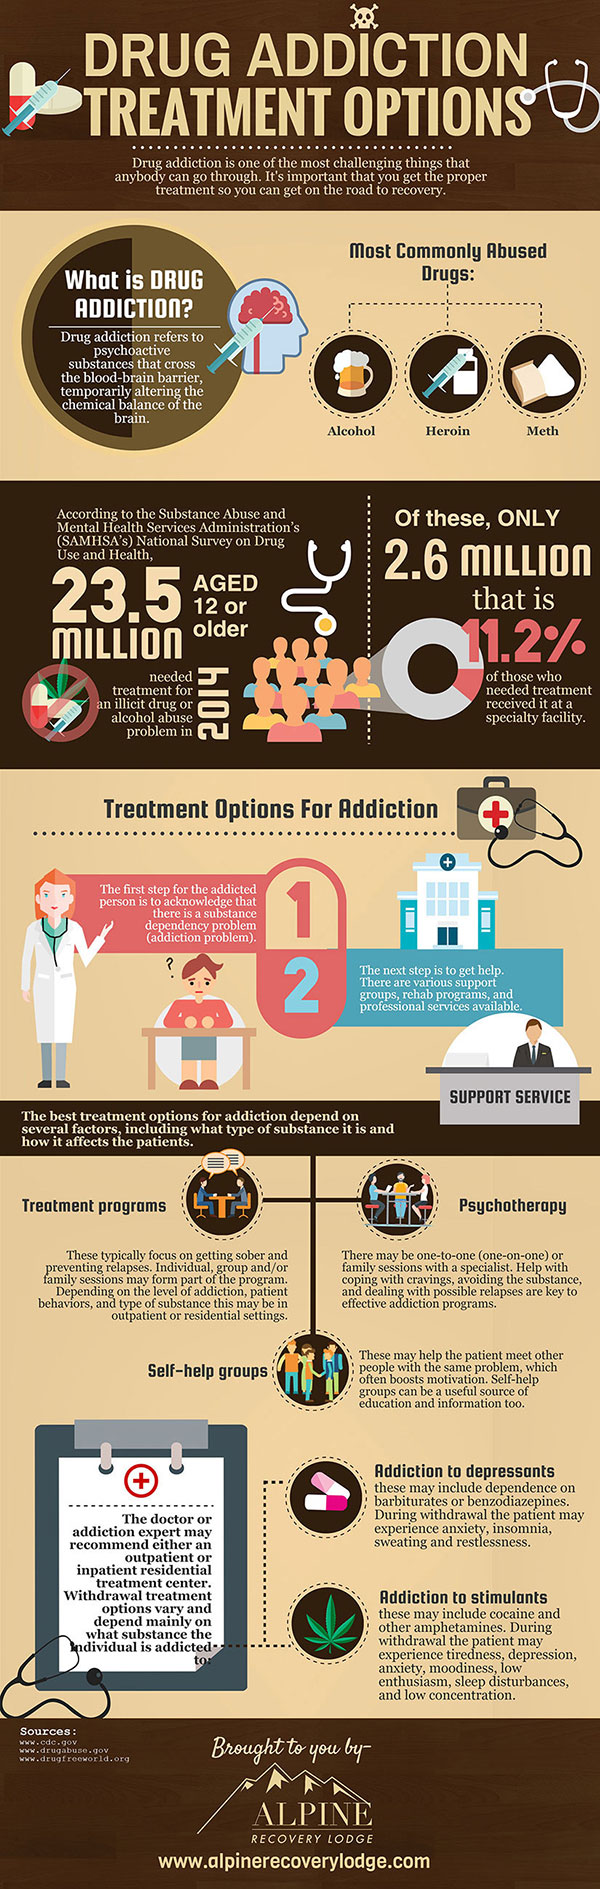 An infographic about drug addiction treatment options.